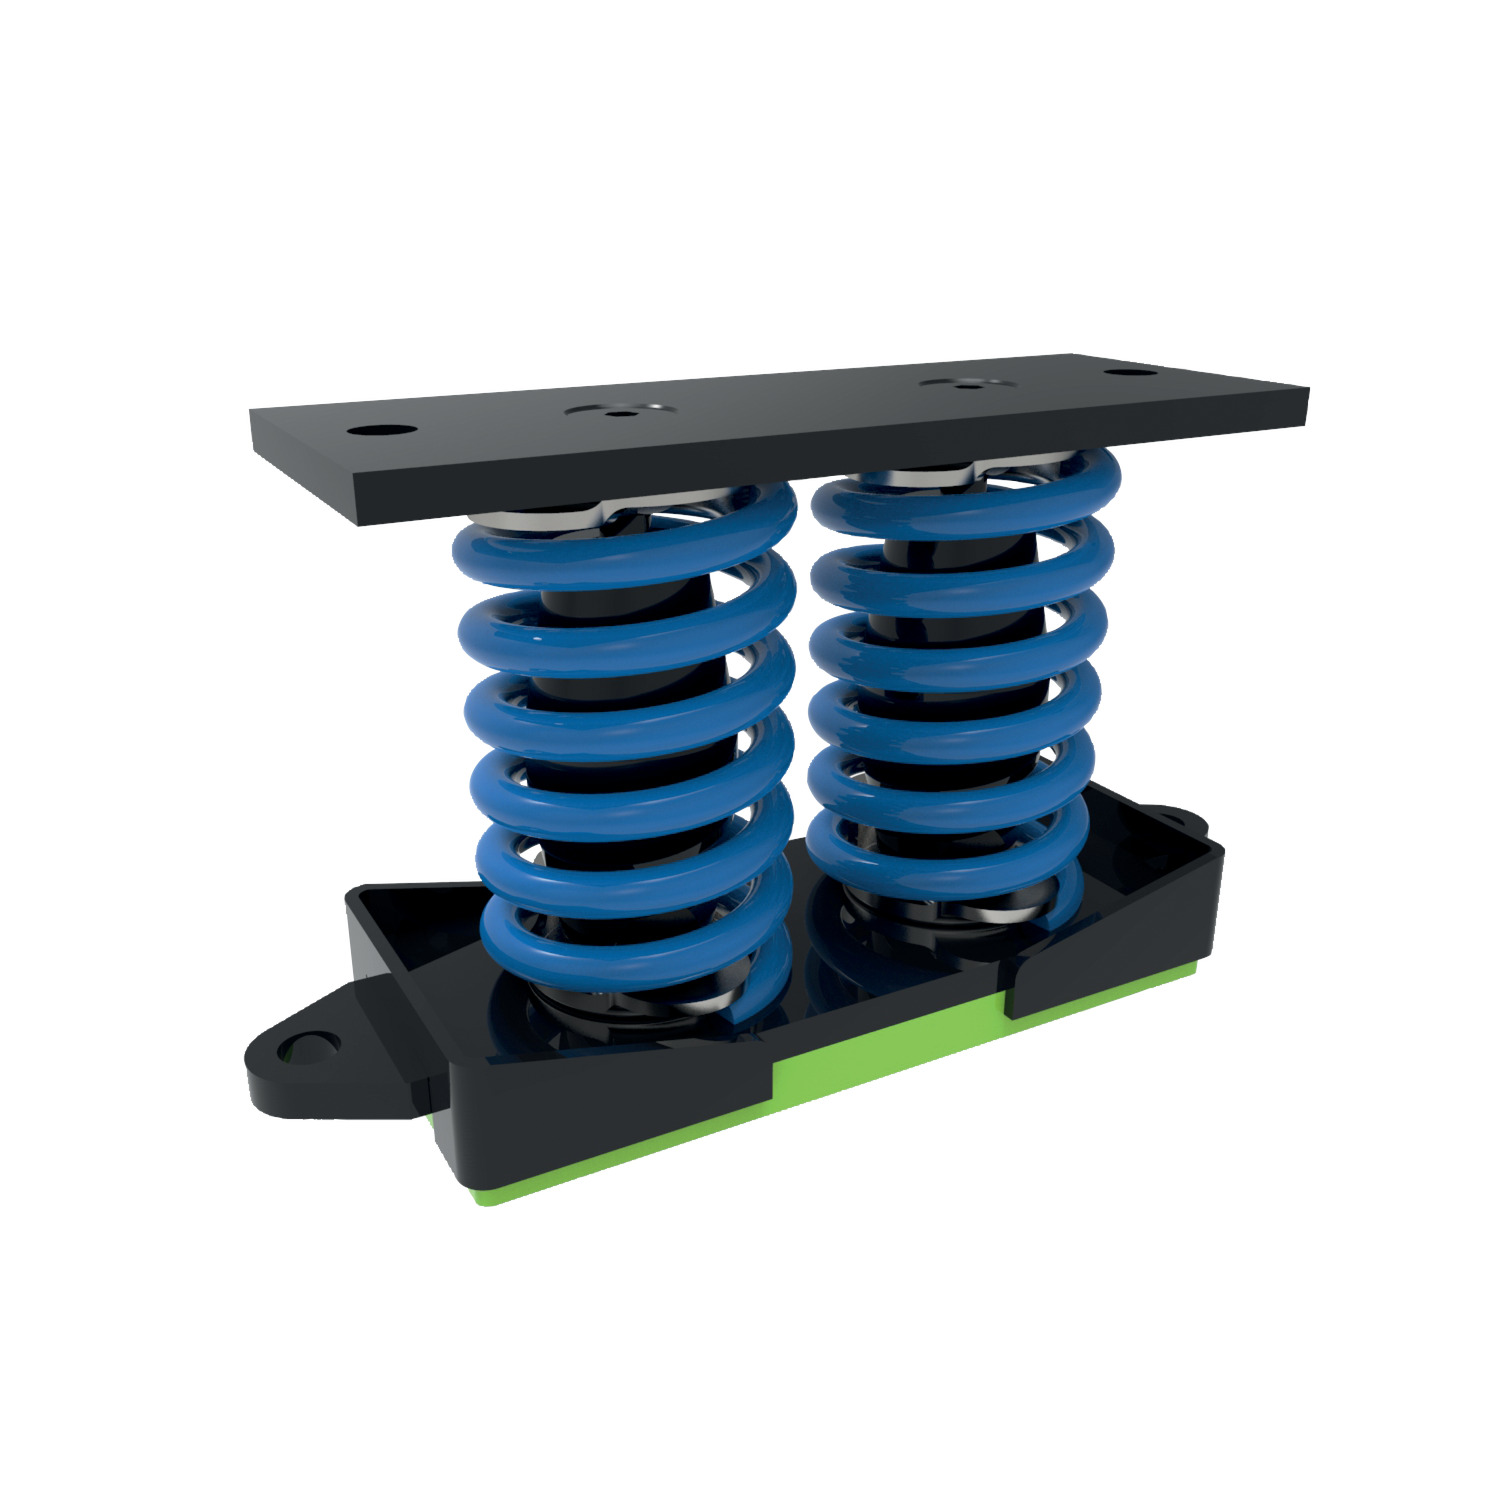 Spring Vibration Damper two spring The sylomer mat that these dampers incorporate, isolates the mid-high frequency vibrations which are transmitted through the coils of the metal springs.